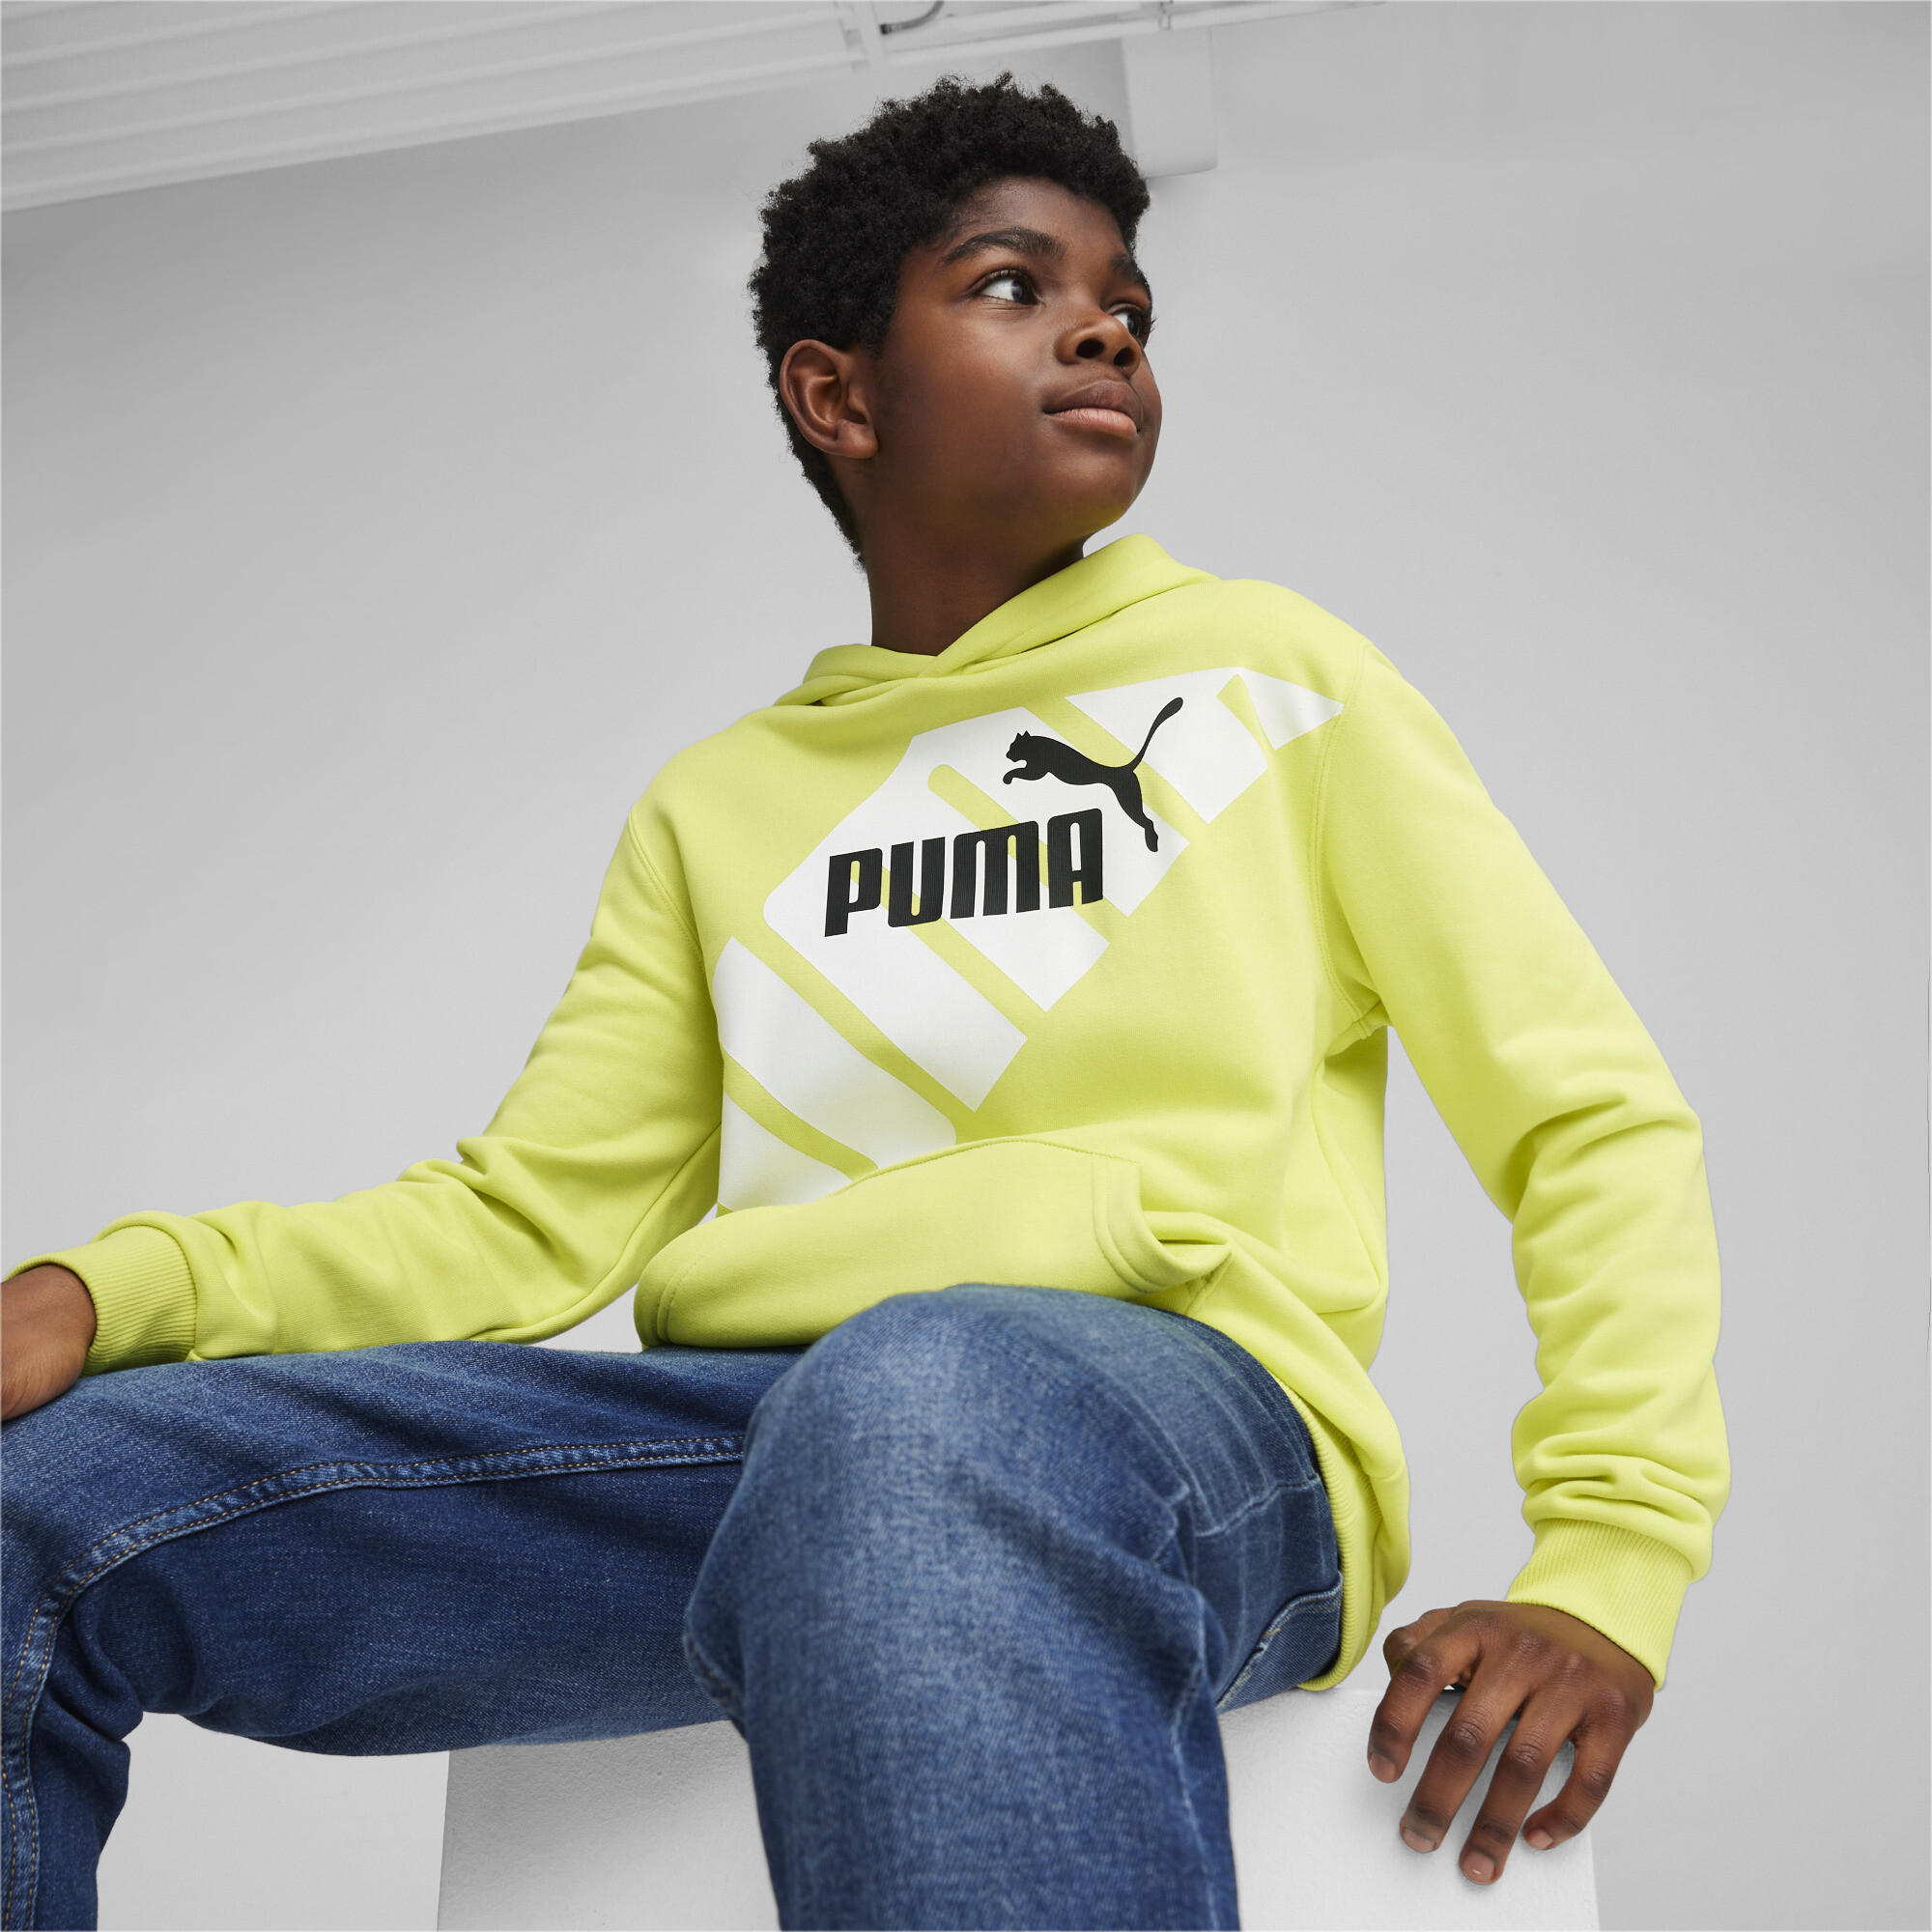 Men's Puma POWER Youth Graphic Hoodie, Green, Size 9-10Y, Age